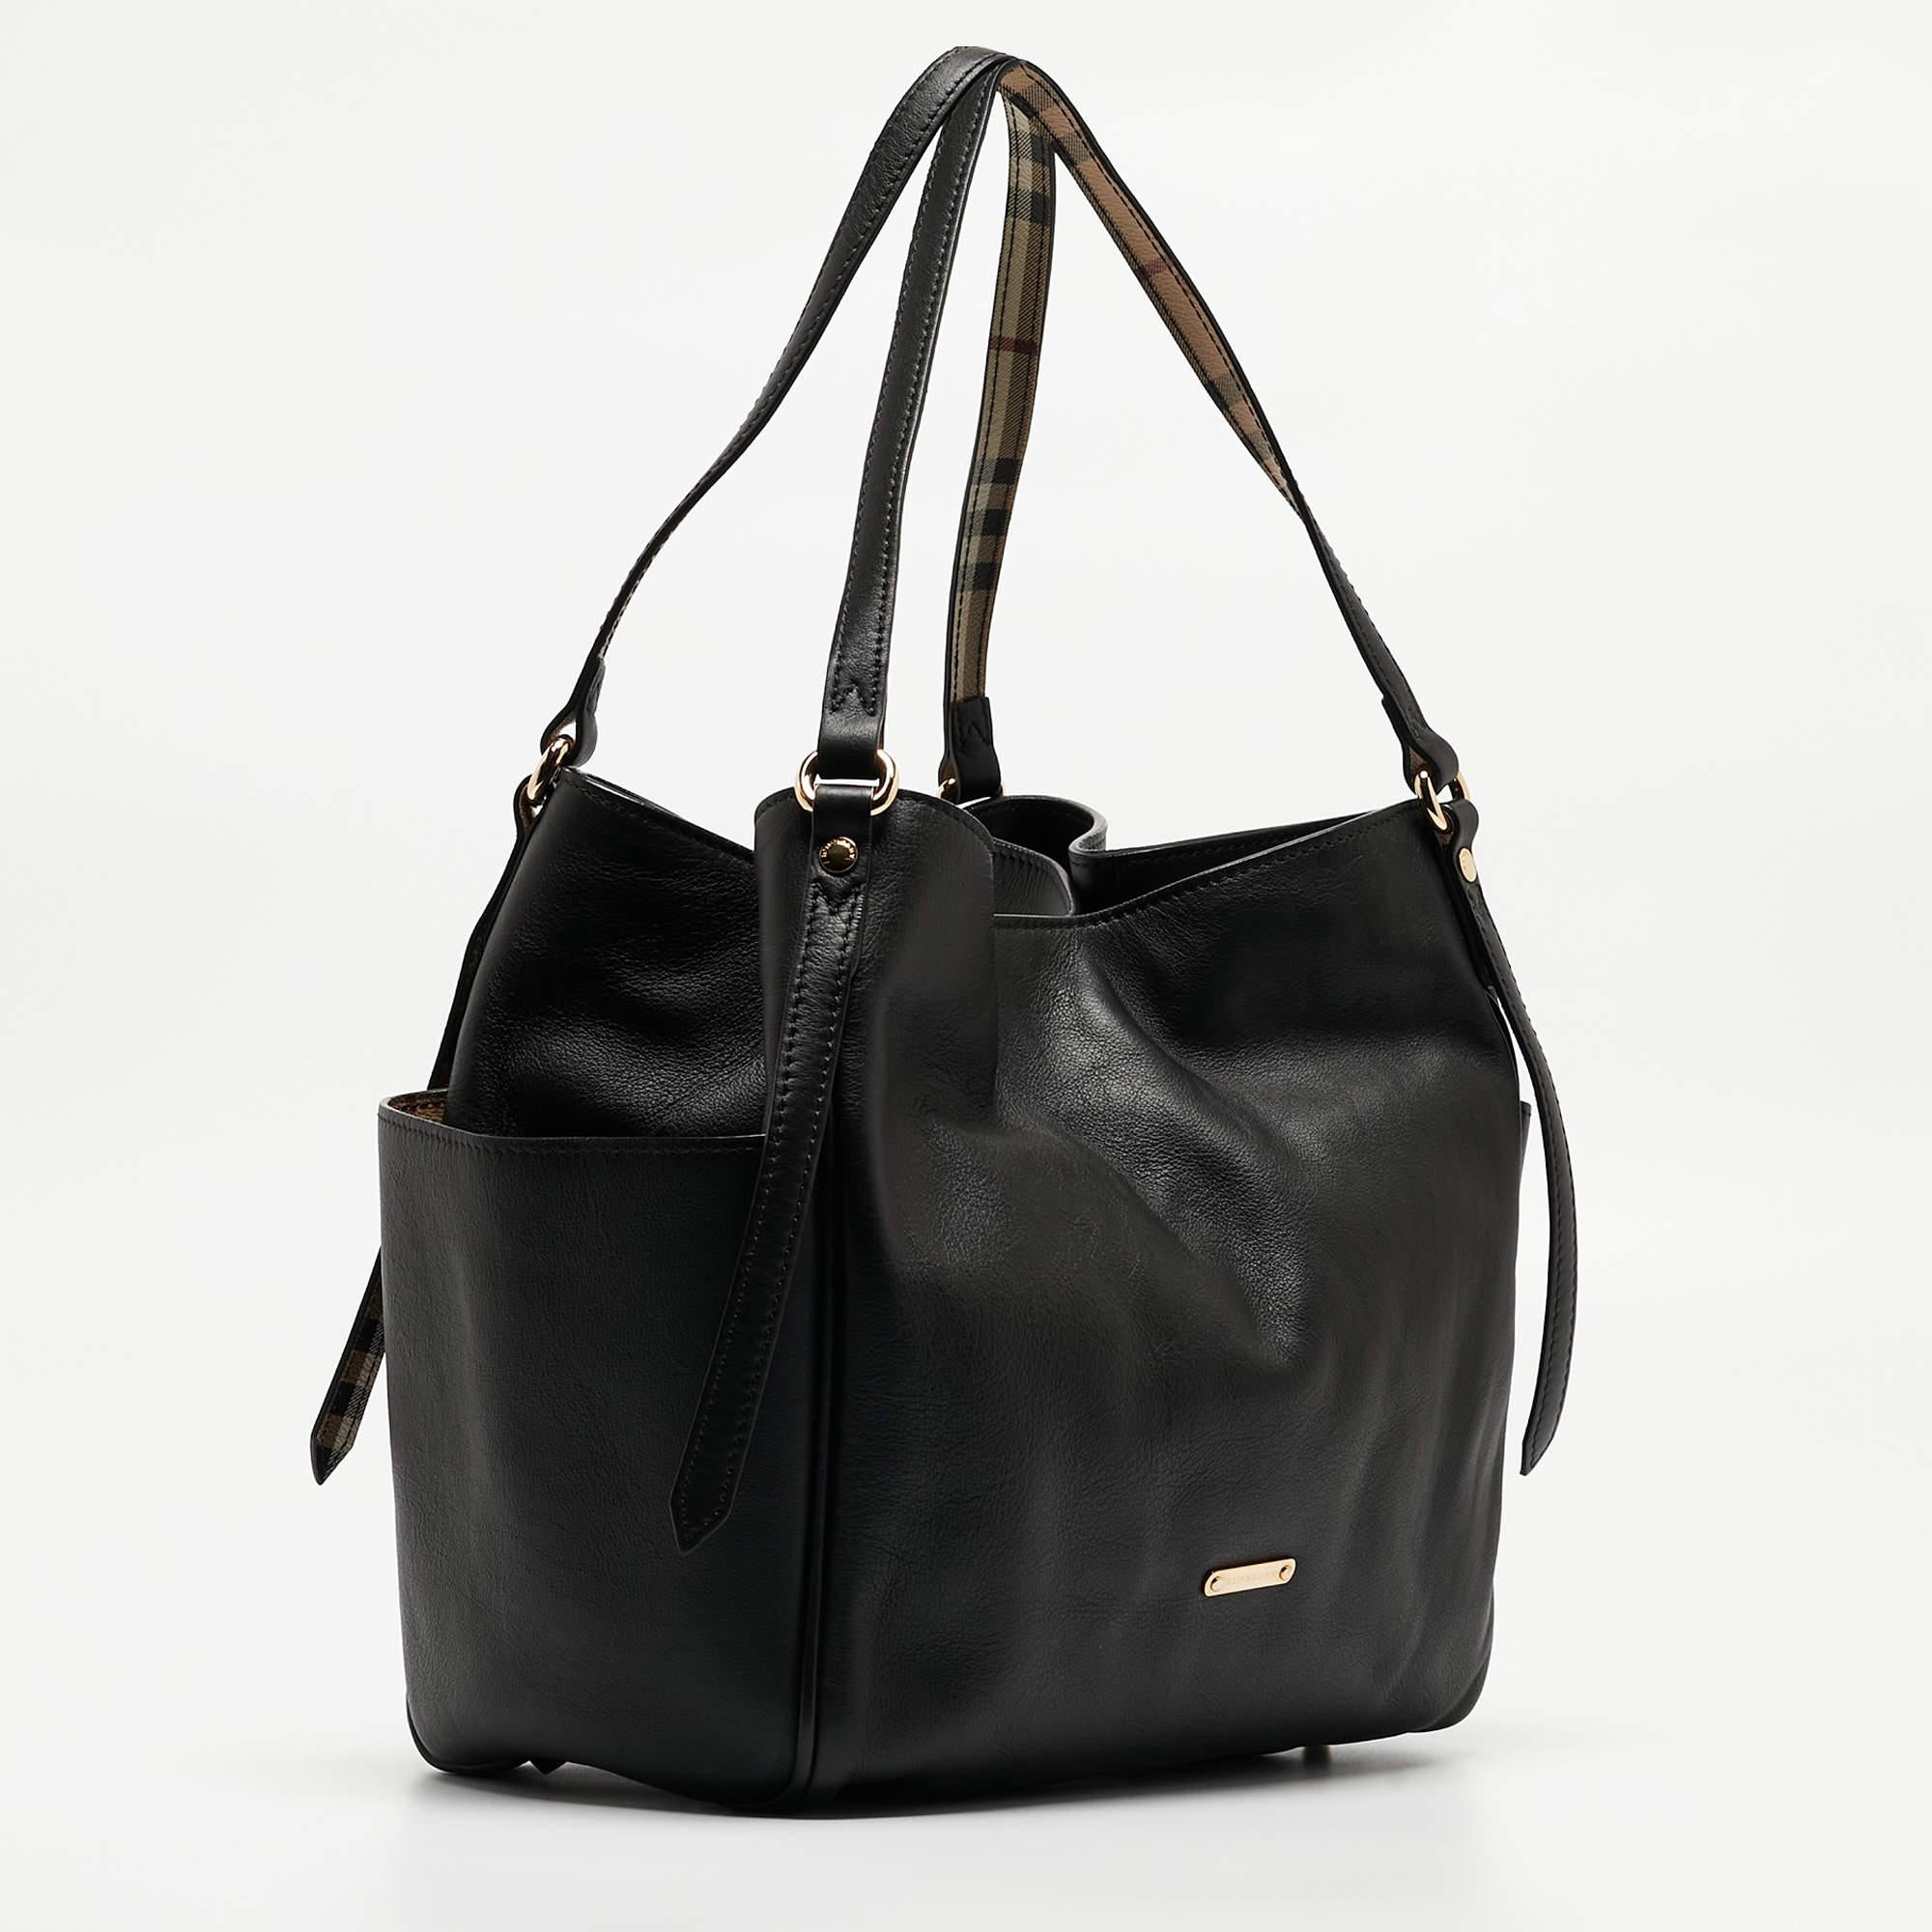 Created from high-quality materials, this tote is enriched with functional and classic elements. It can be carried around conveniently, and its interior is perfectly sized to keep your belongings with ease.

